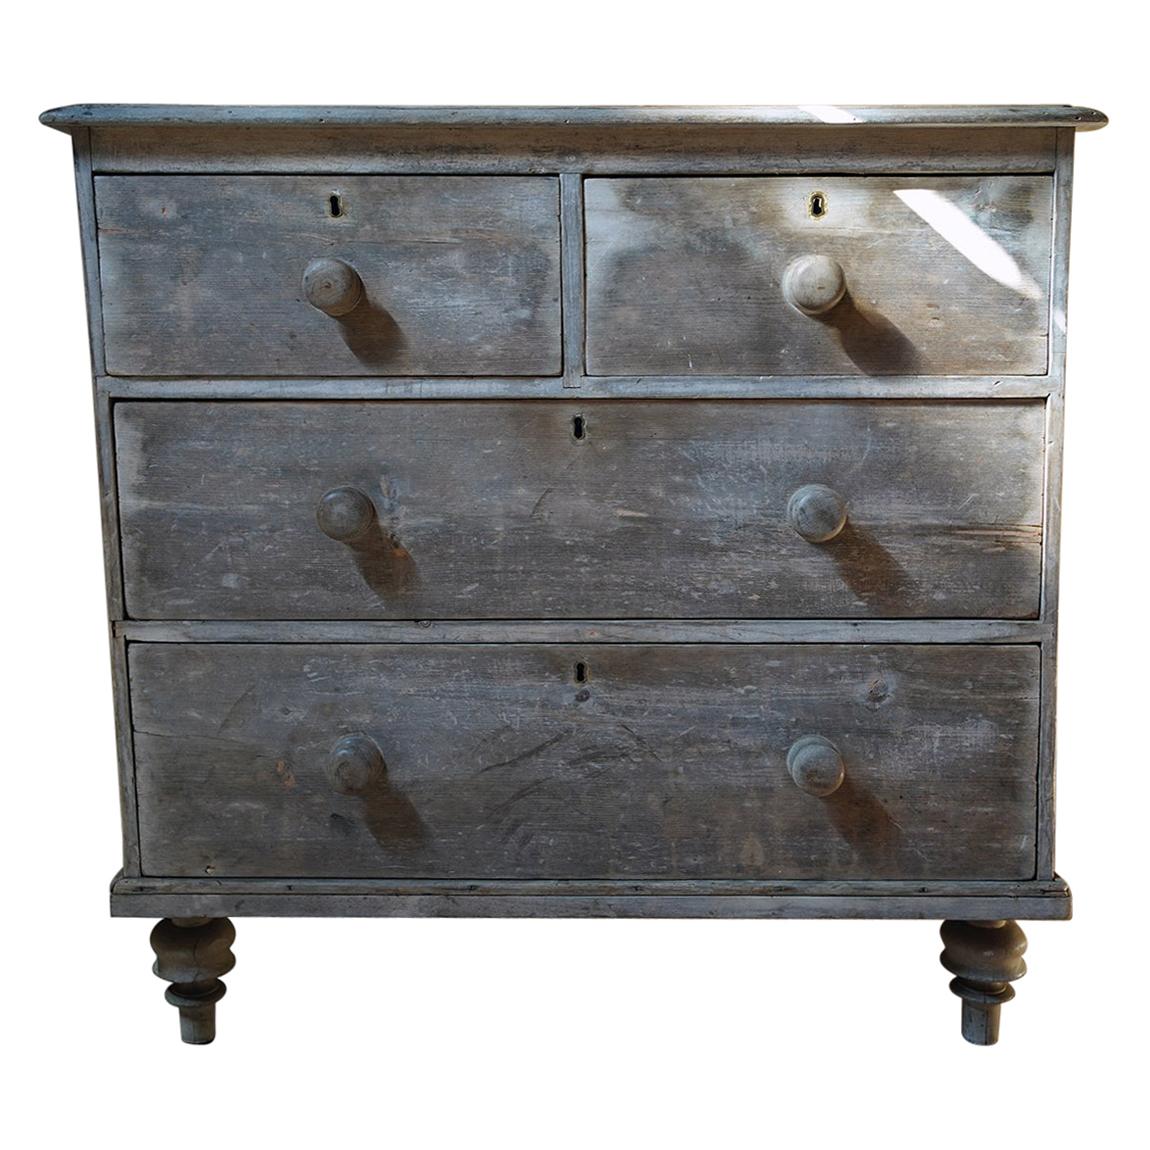 Late 19thC Bleached Pine Chest of Drawers, c.1900